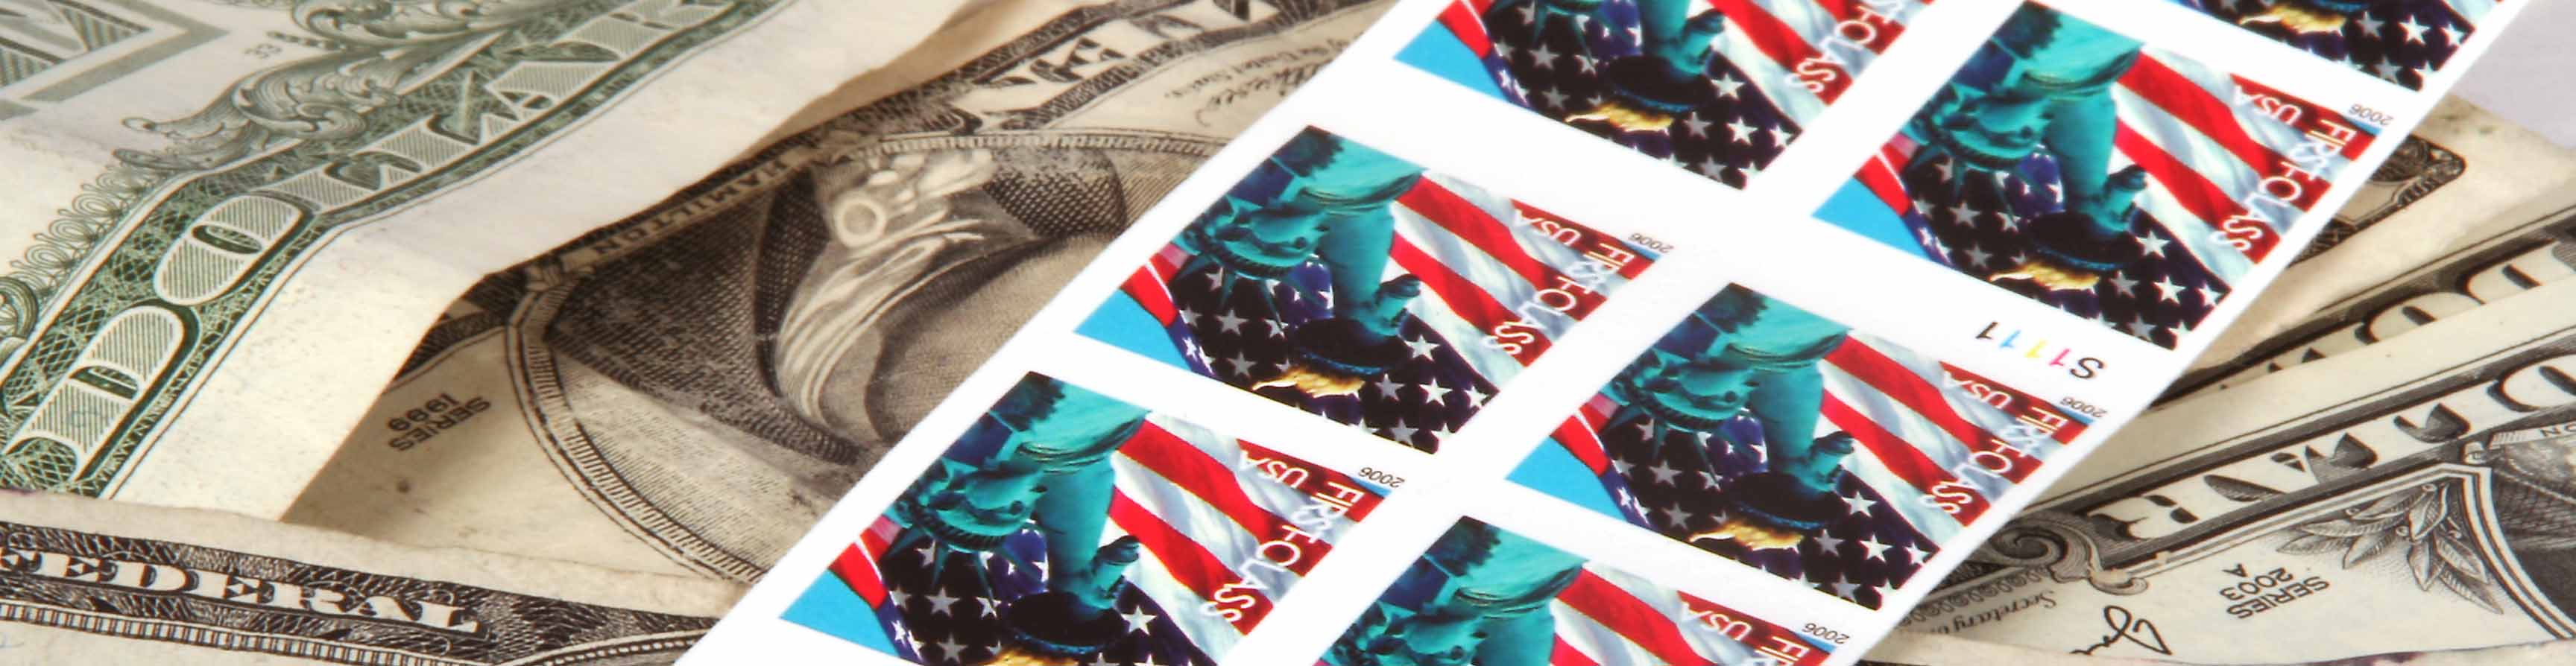 USPS Proposes Postage Rate Increases for 2016